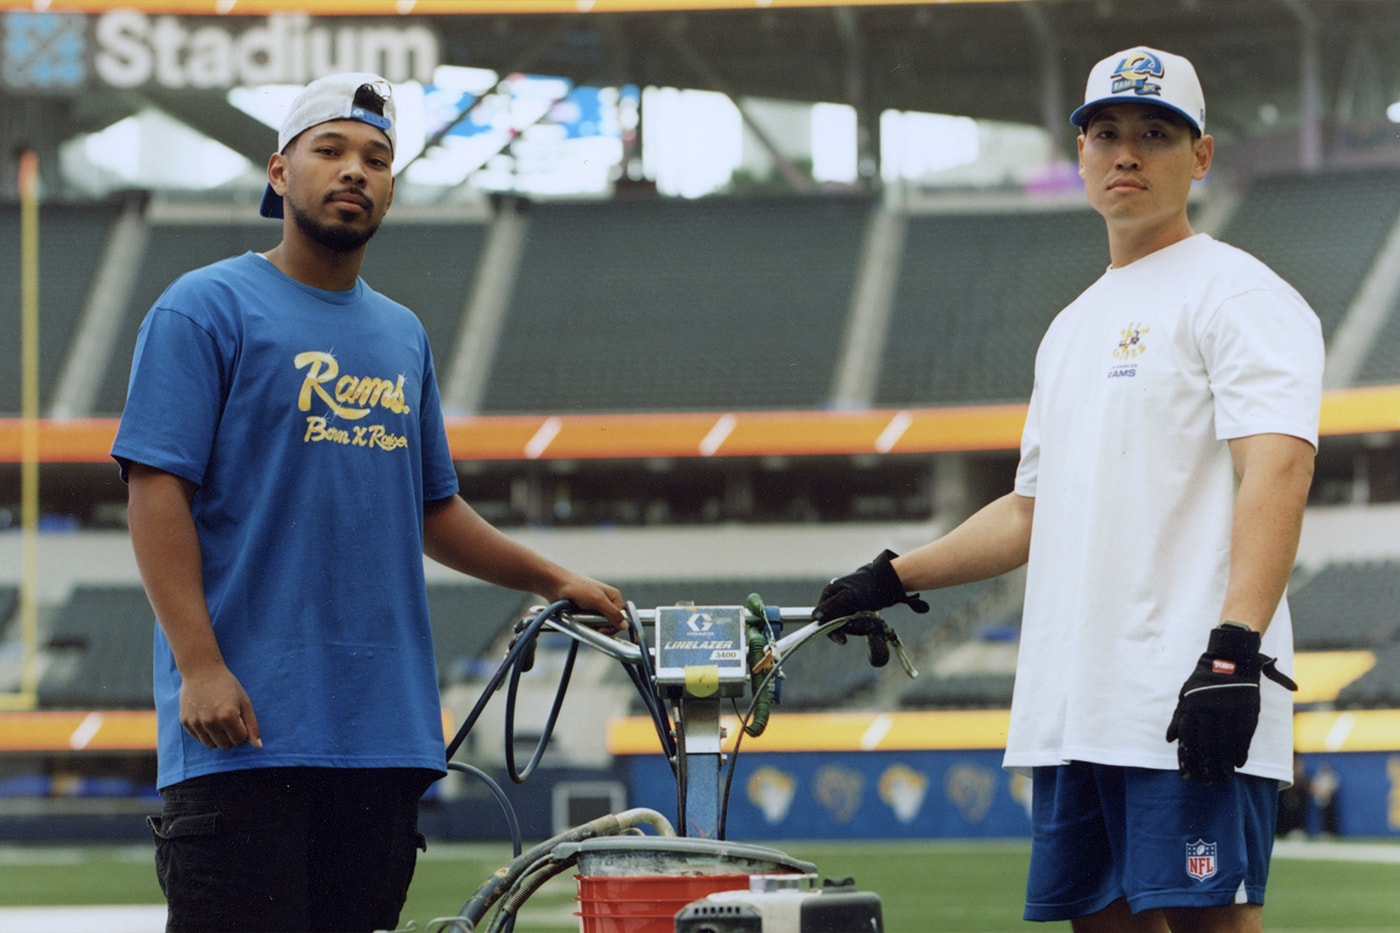 Los Angeles Rams and Born X Raised Join Forces for NFL Capsule Collection game opener san francisco 49ers spantos